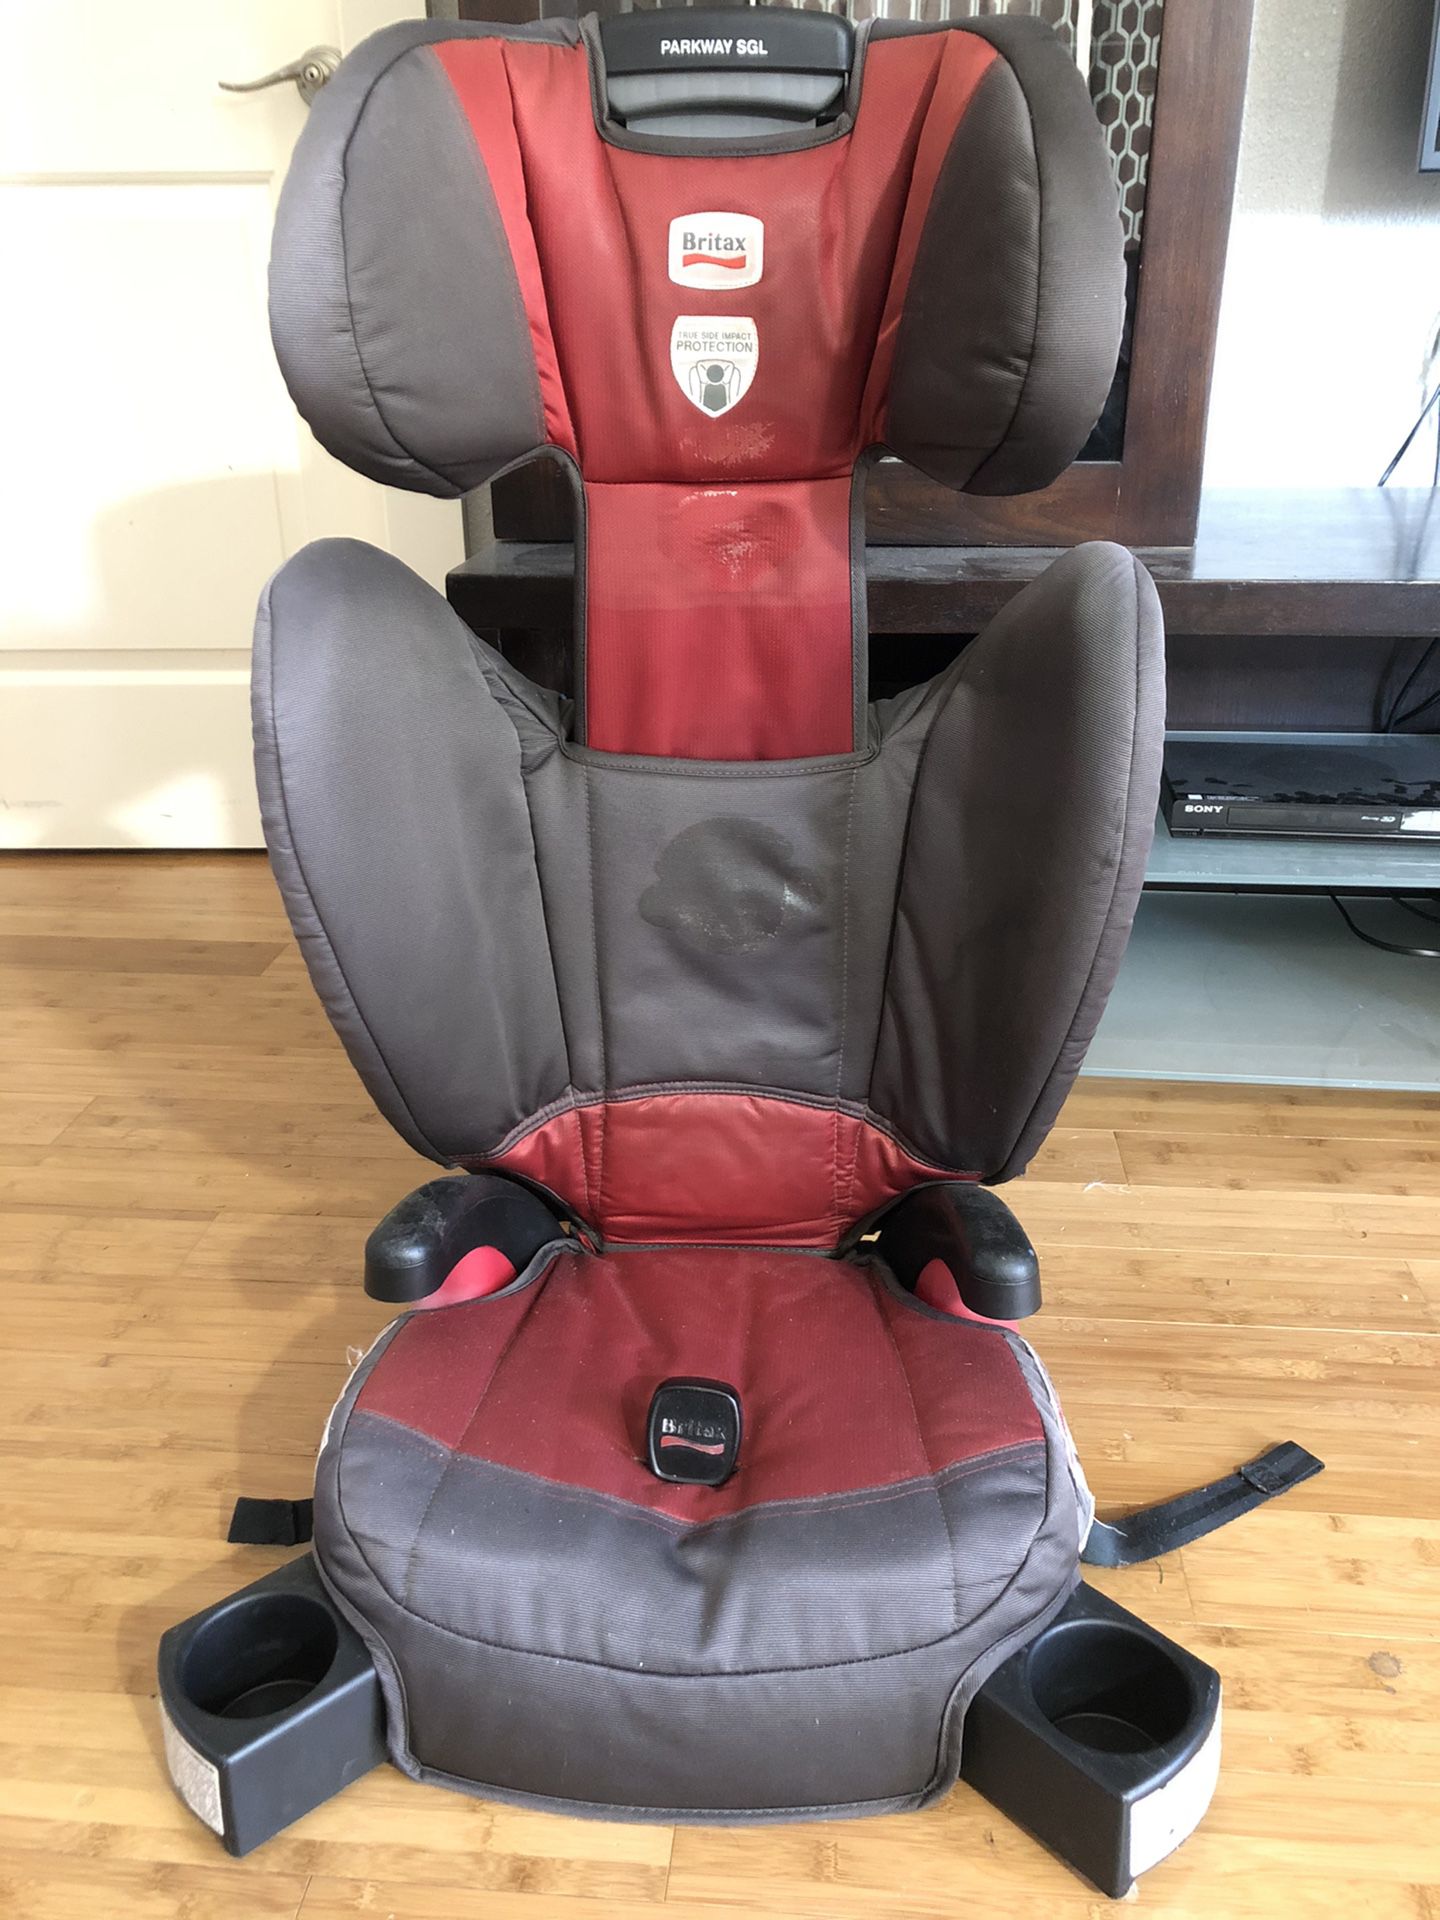 Britax Parkway SGL booster seat